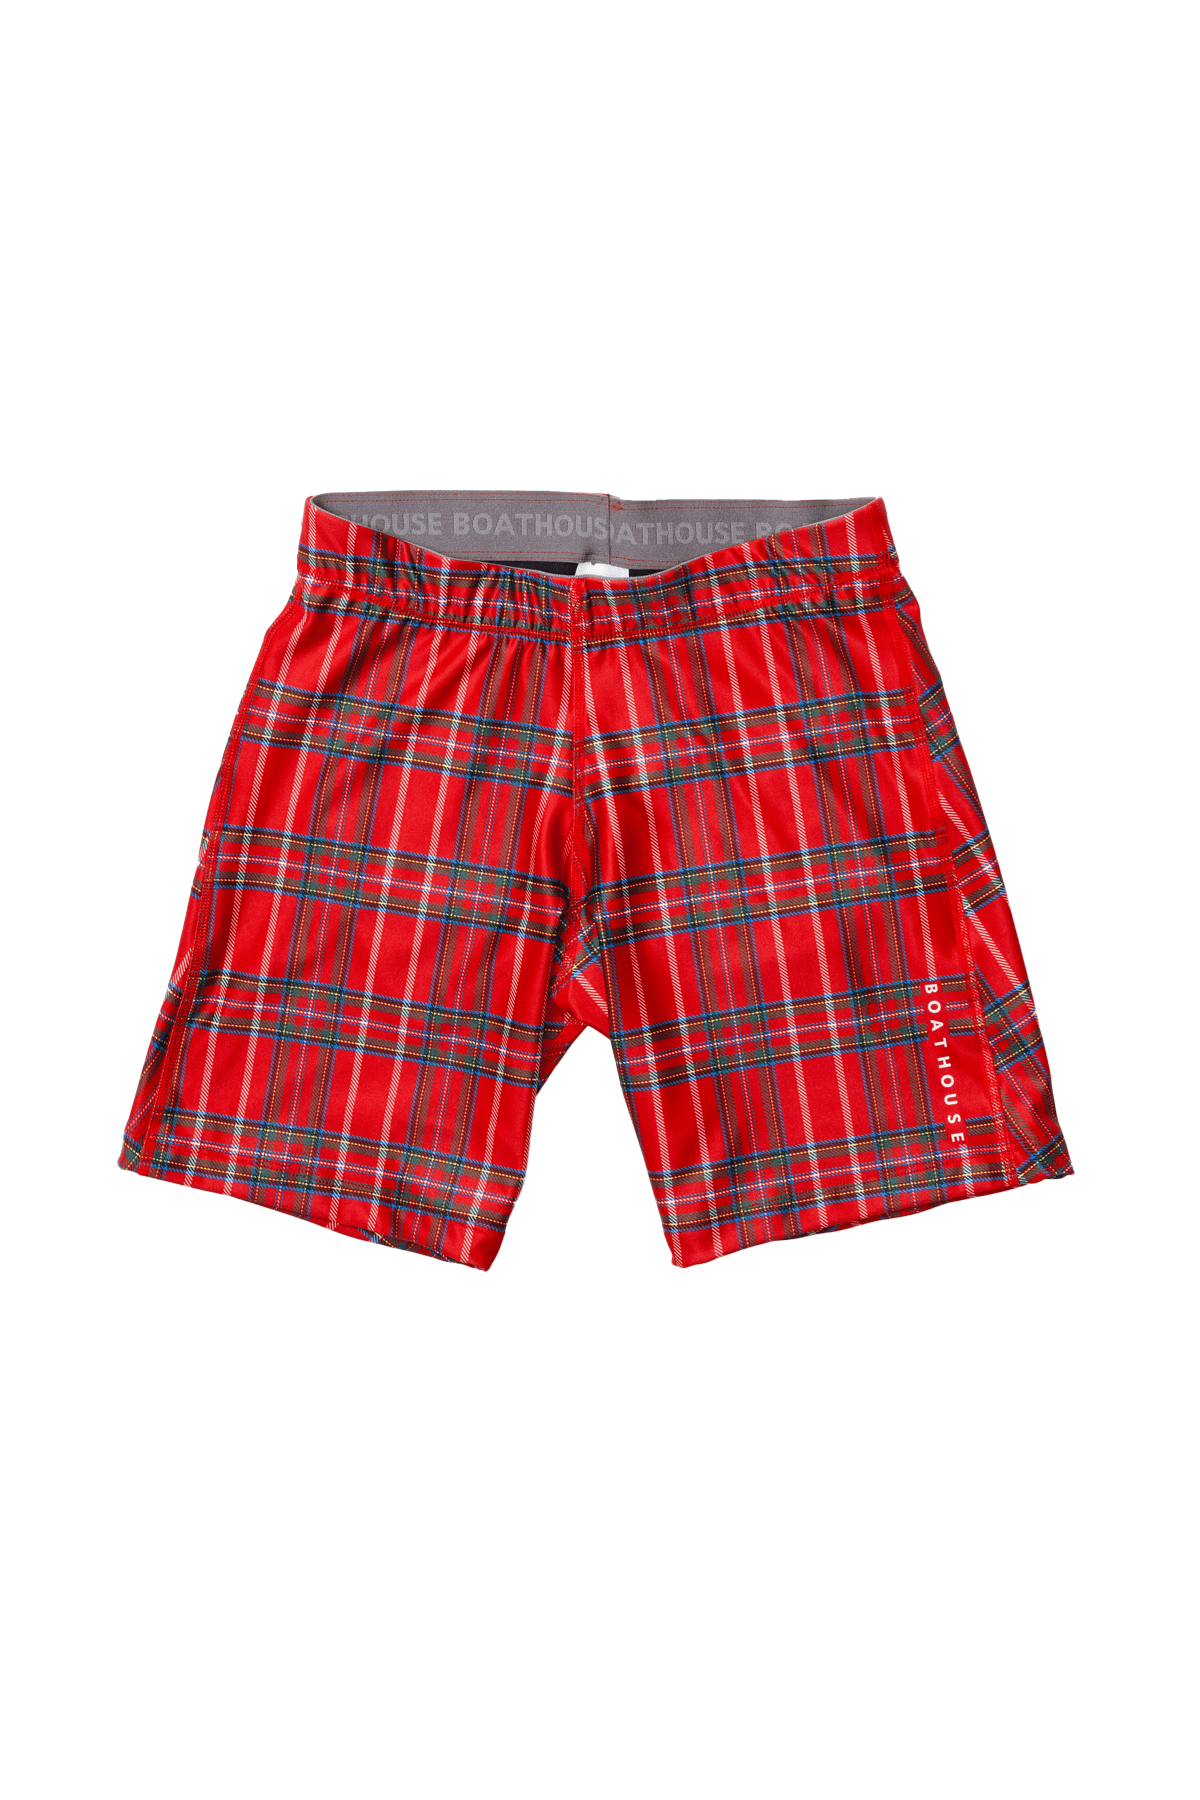 MEN'S PLAID ACCEL ROWING TROU Red / Small